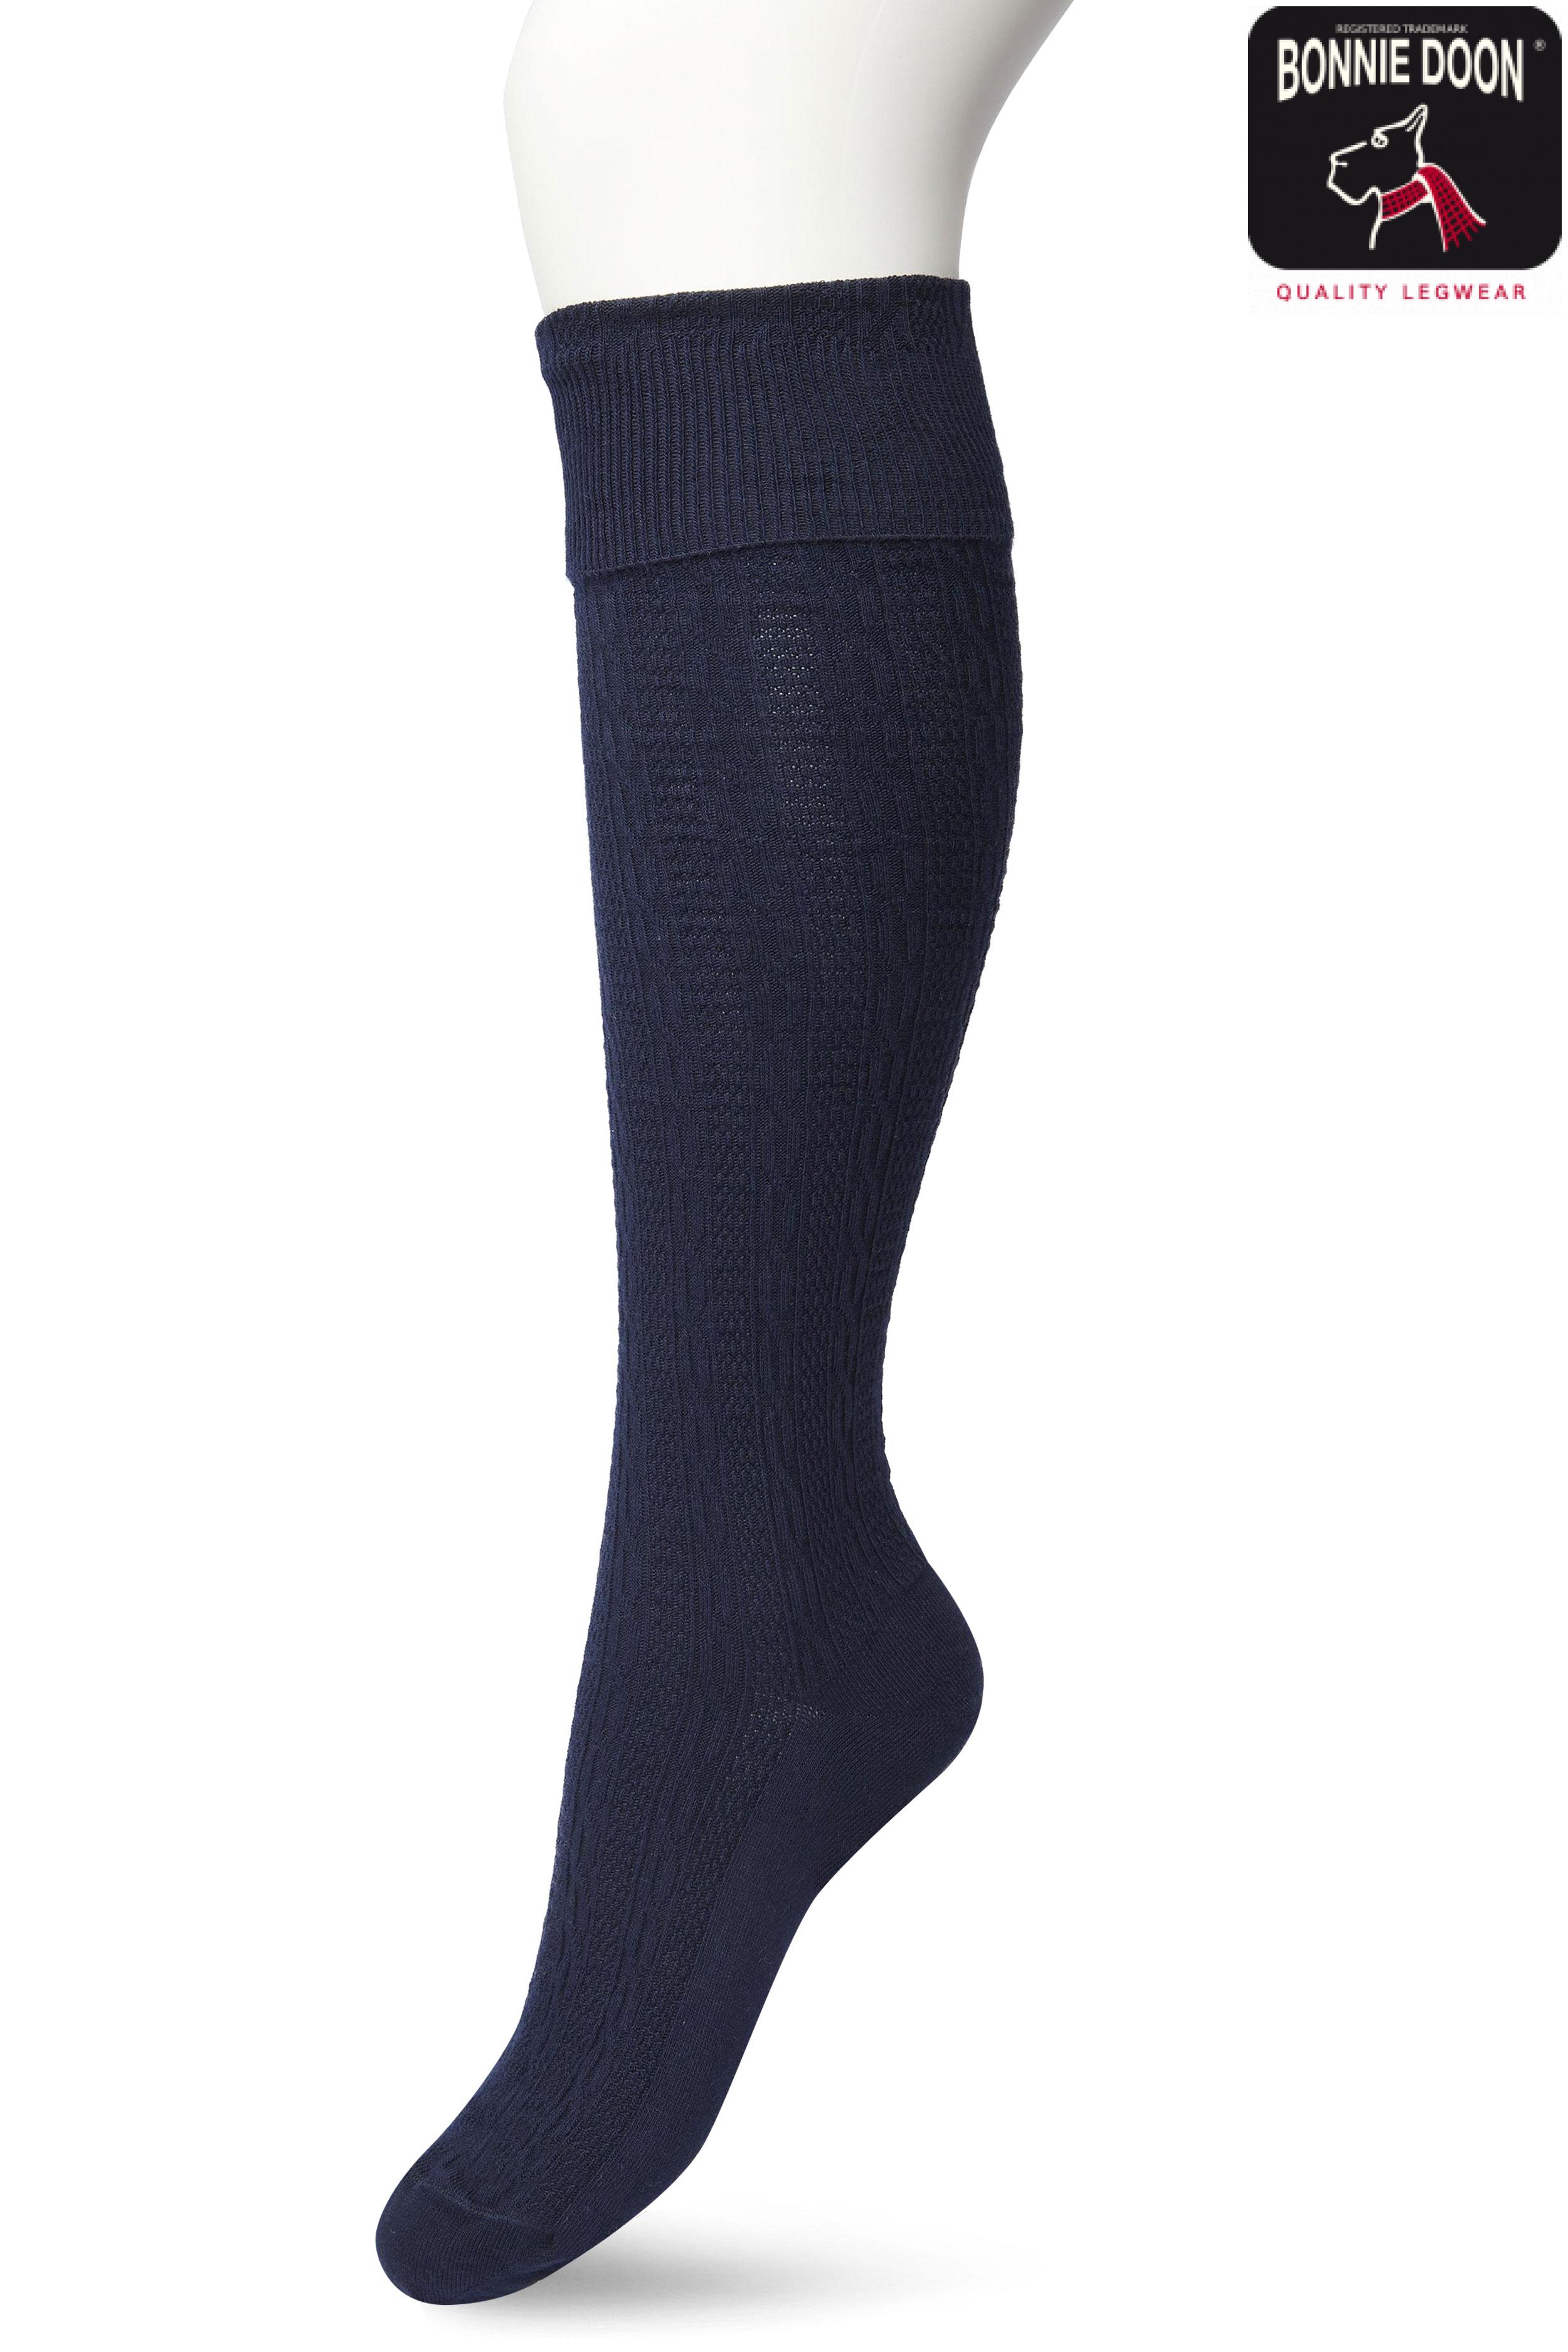 Classic Cable knee high Dark blue